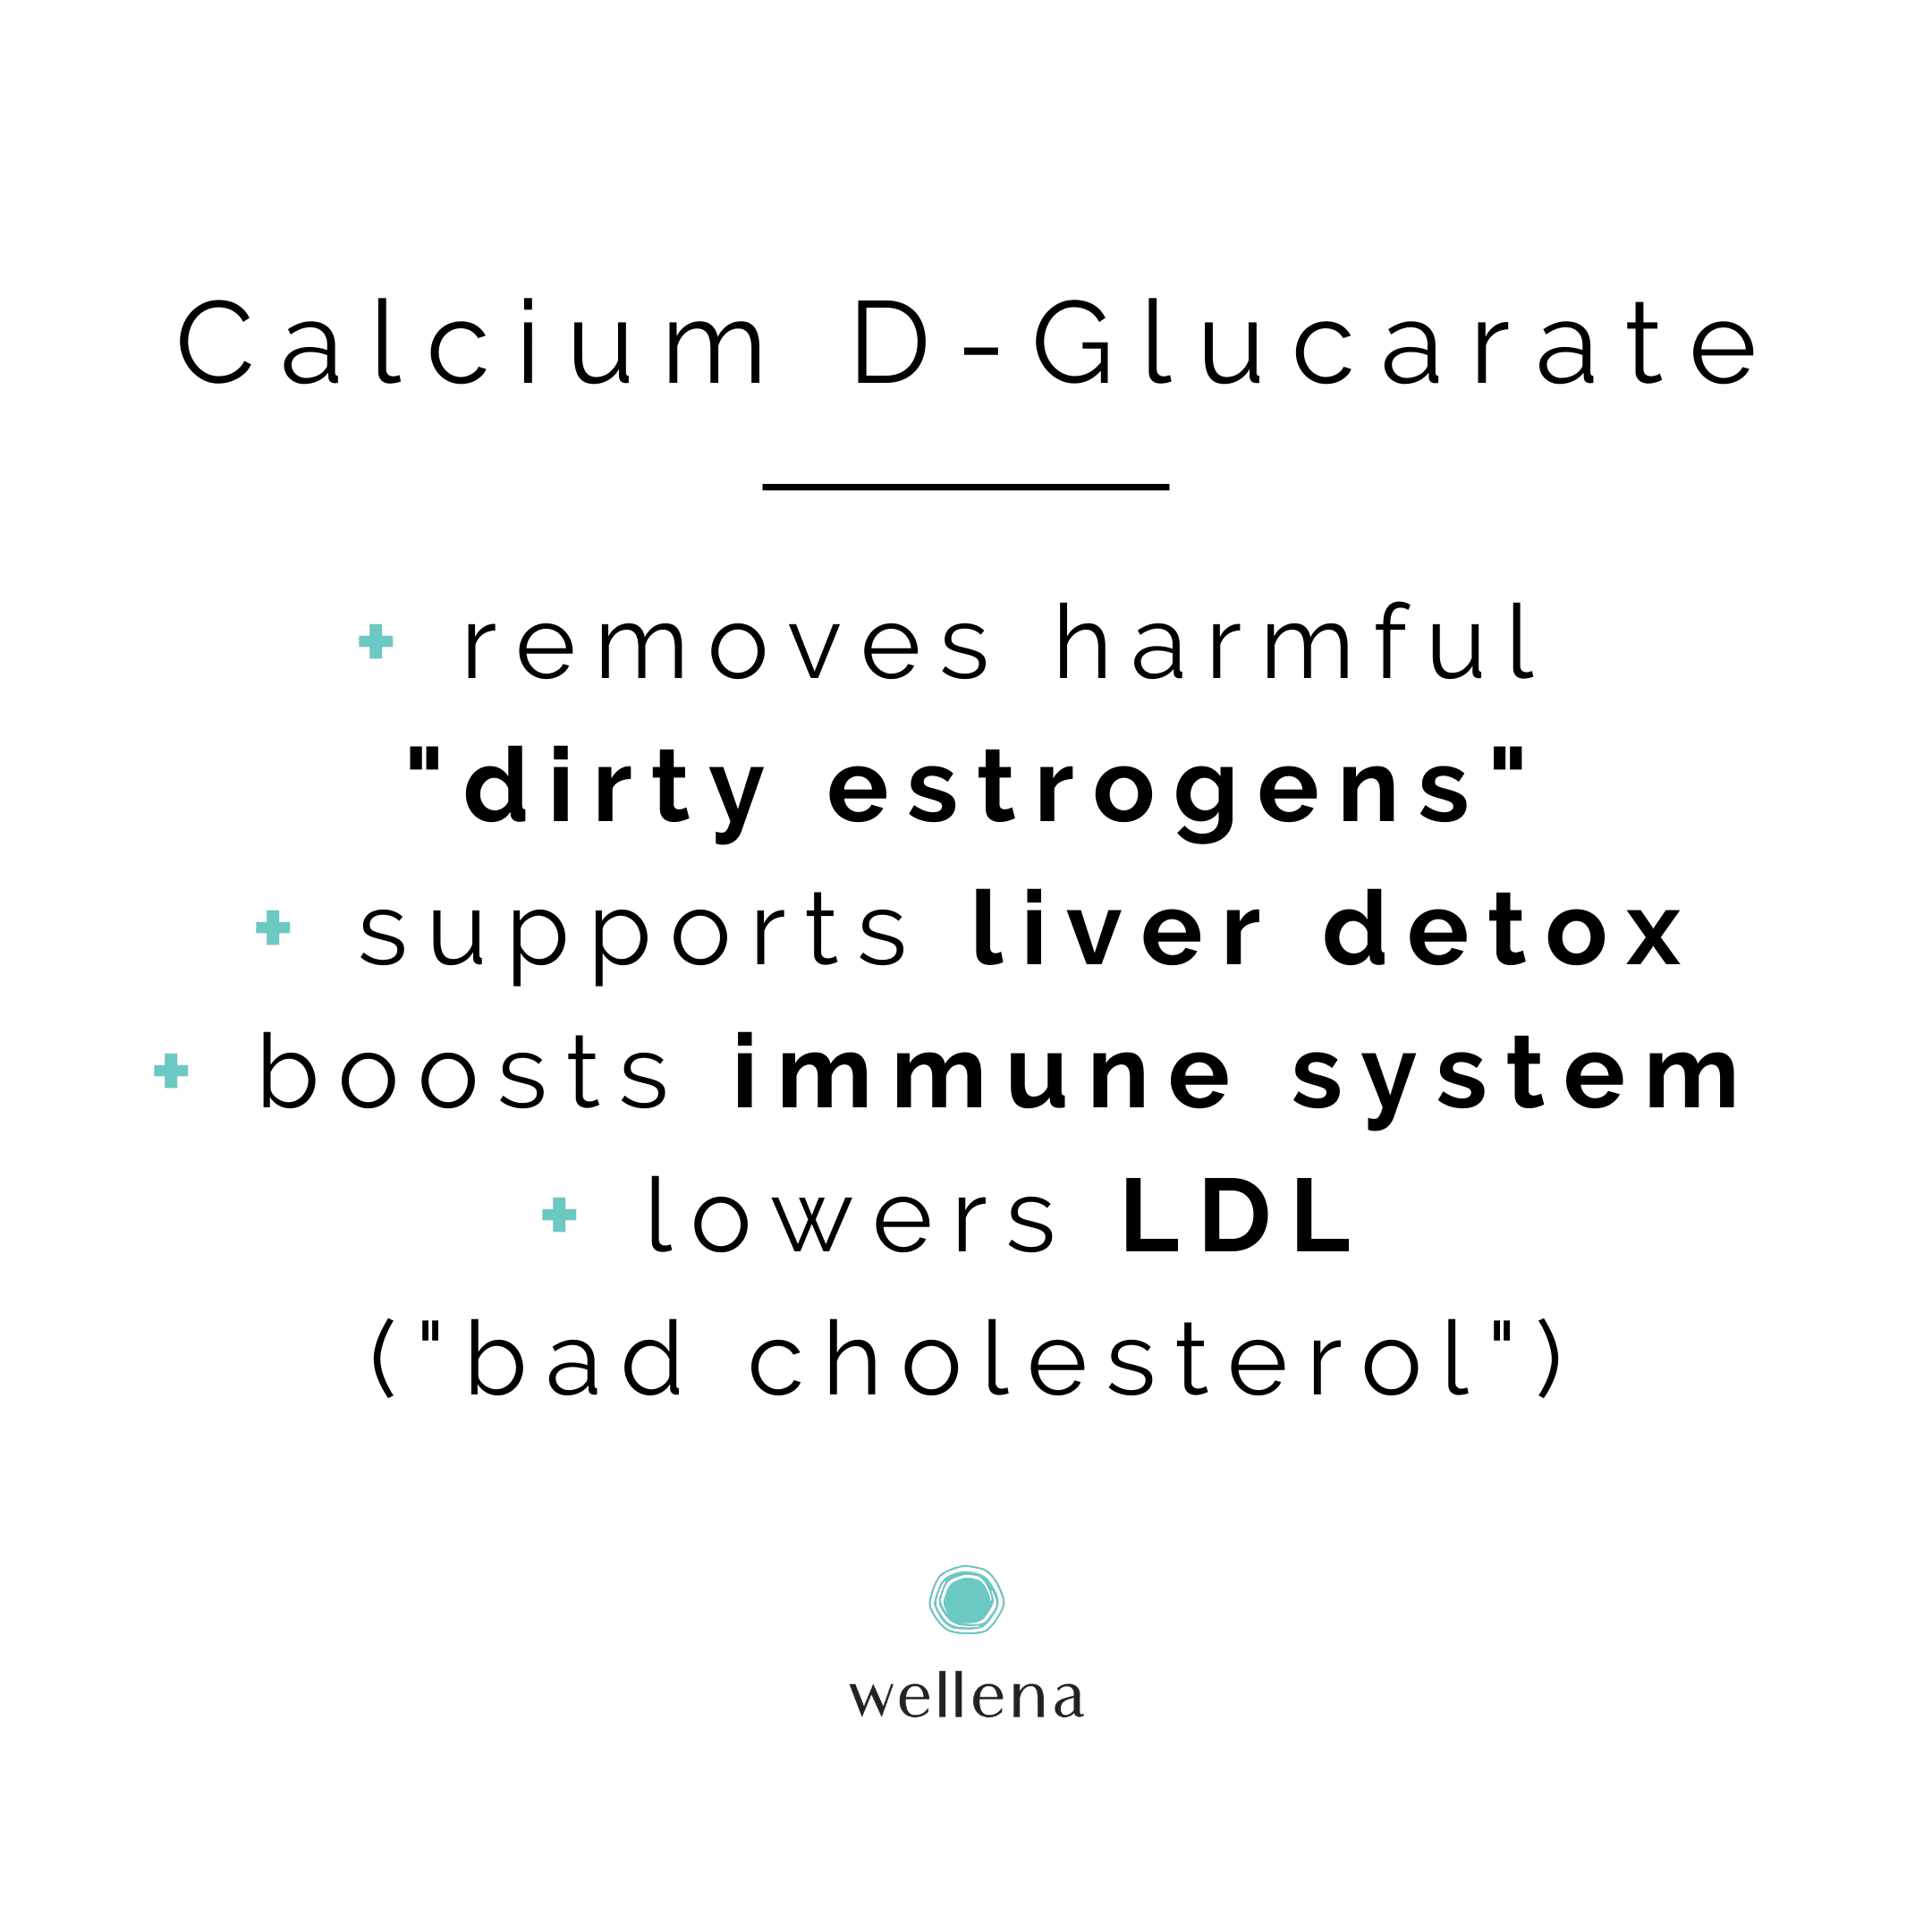 How Calcium D-Glucarate can help you.